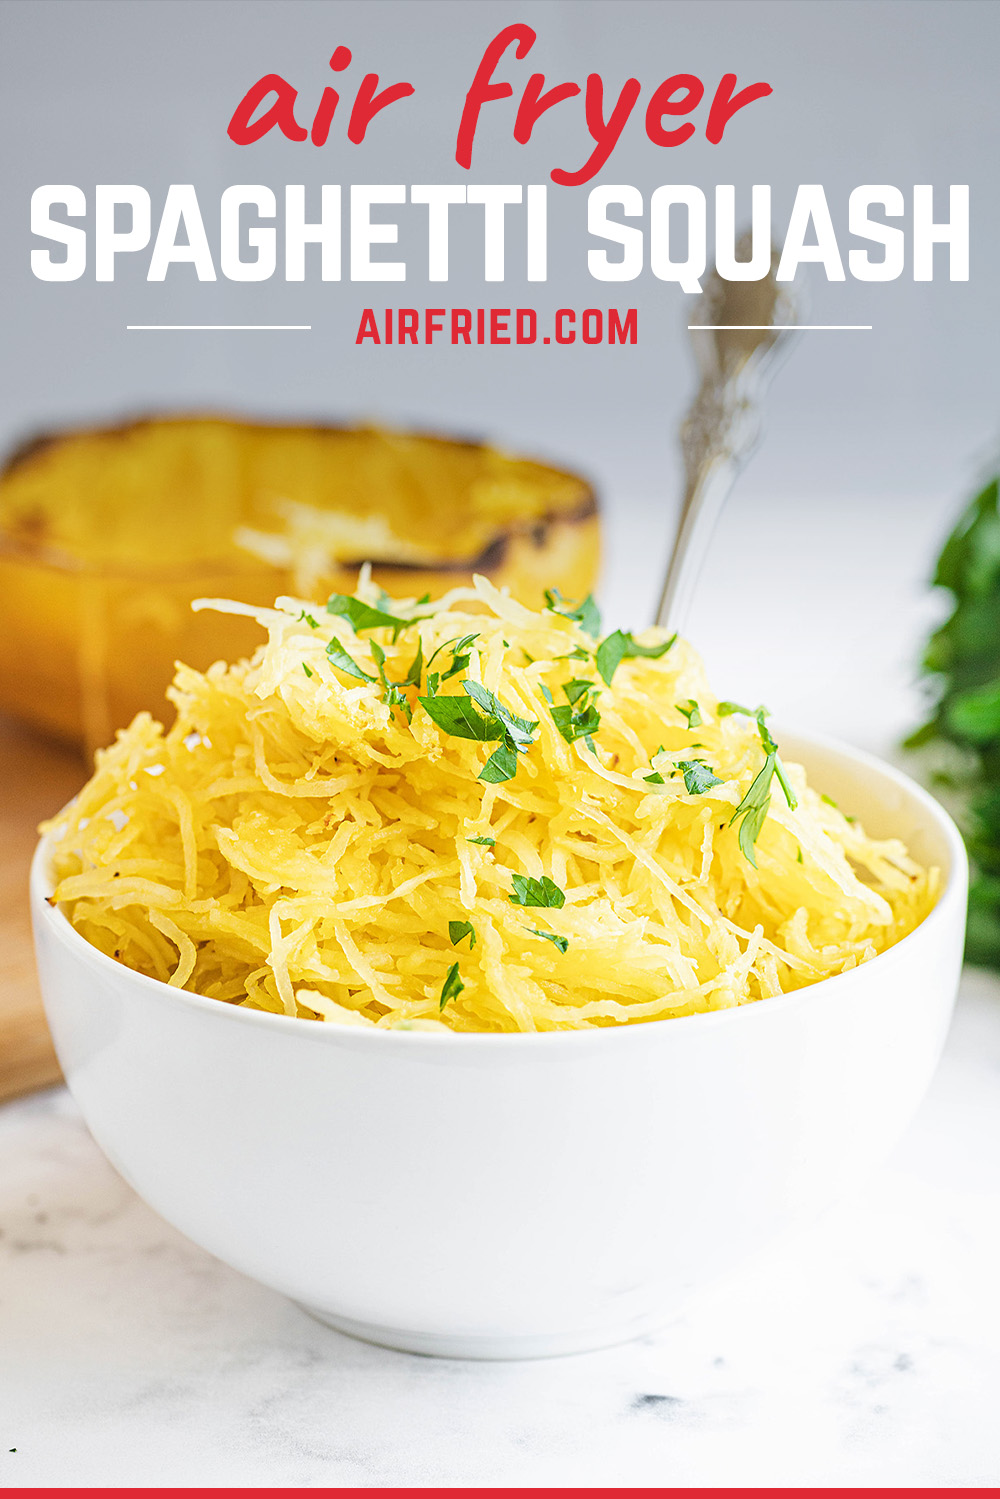 Spaghetti squash in the air fryer is a really easy way to get a great pasta substitute.